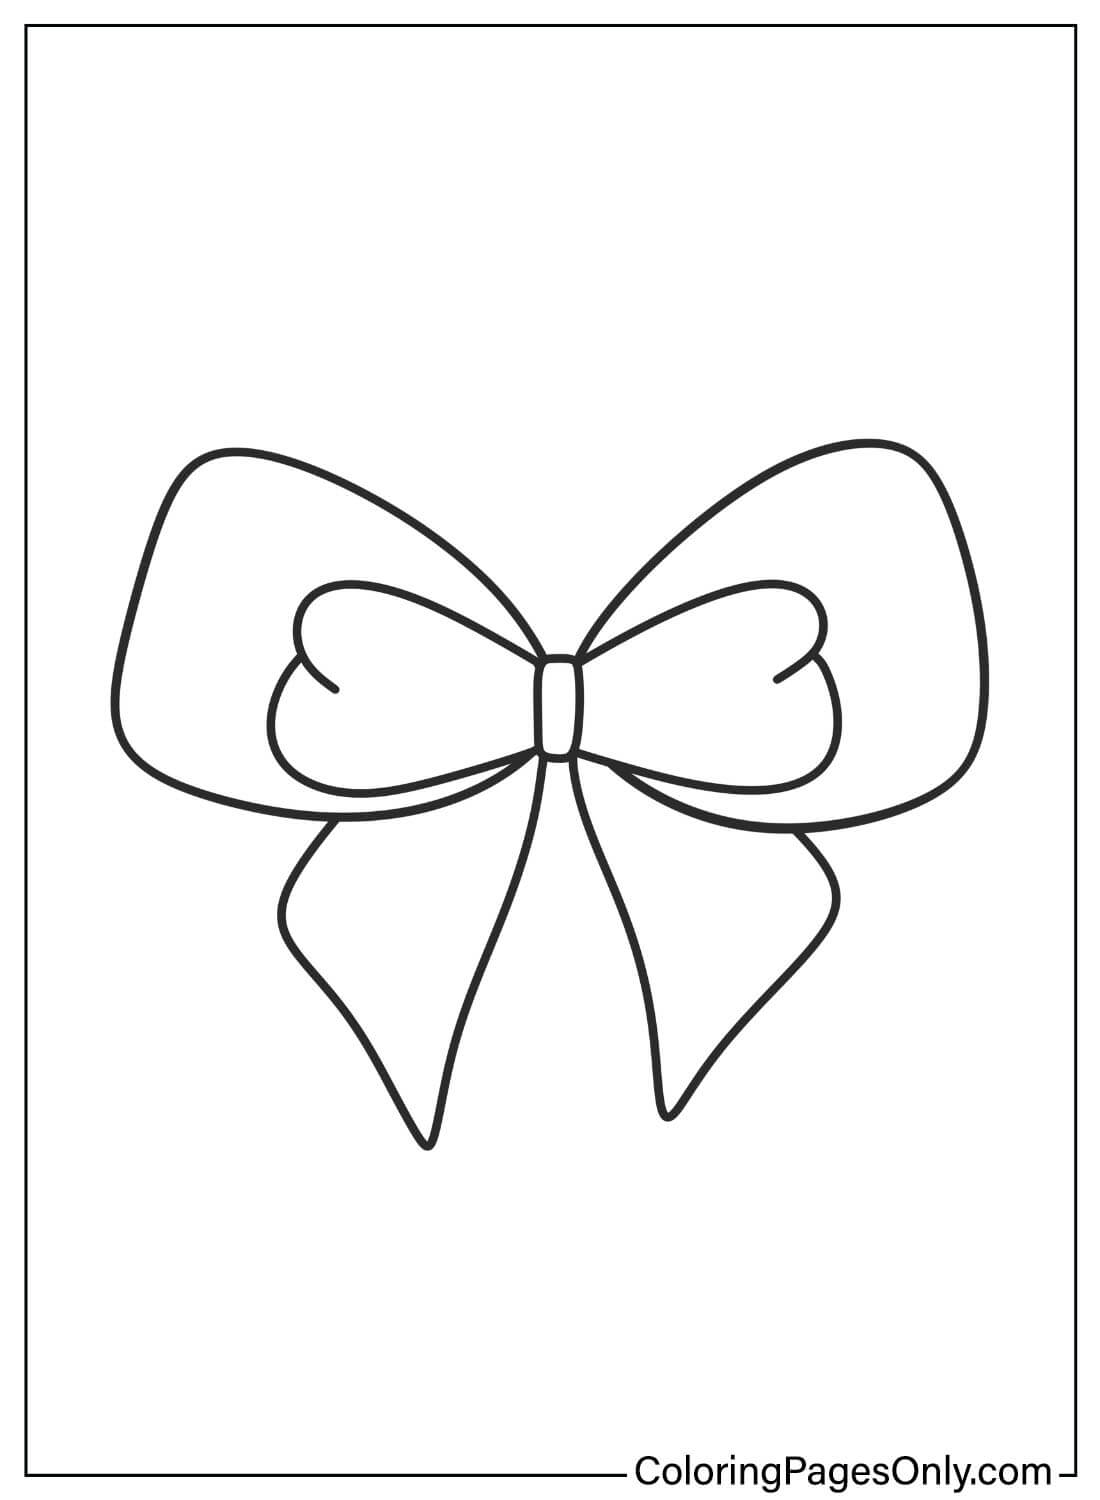 Bow Coloring Page Free from Bow